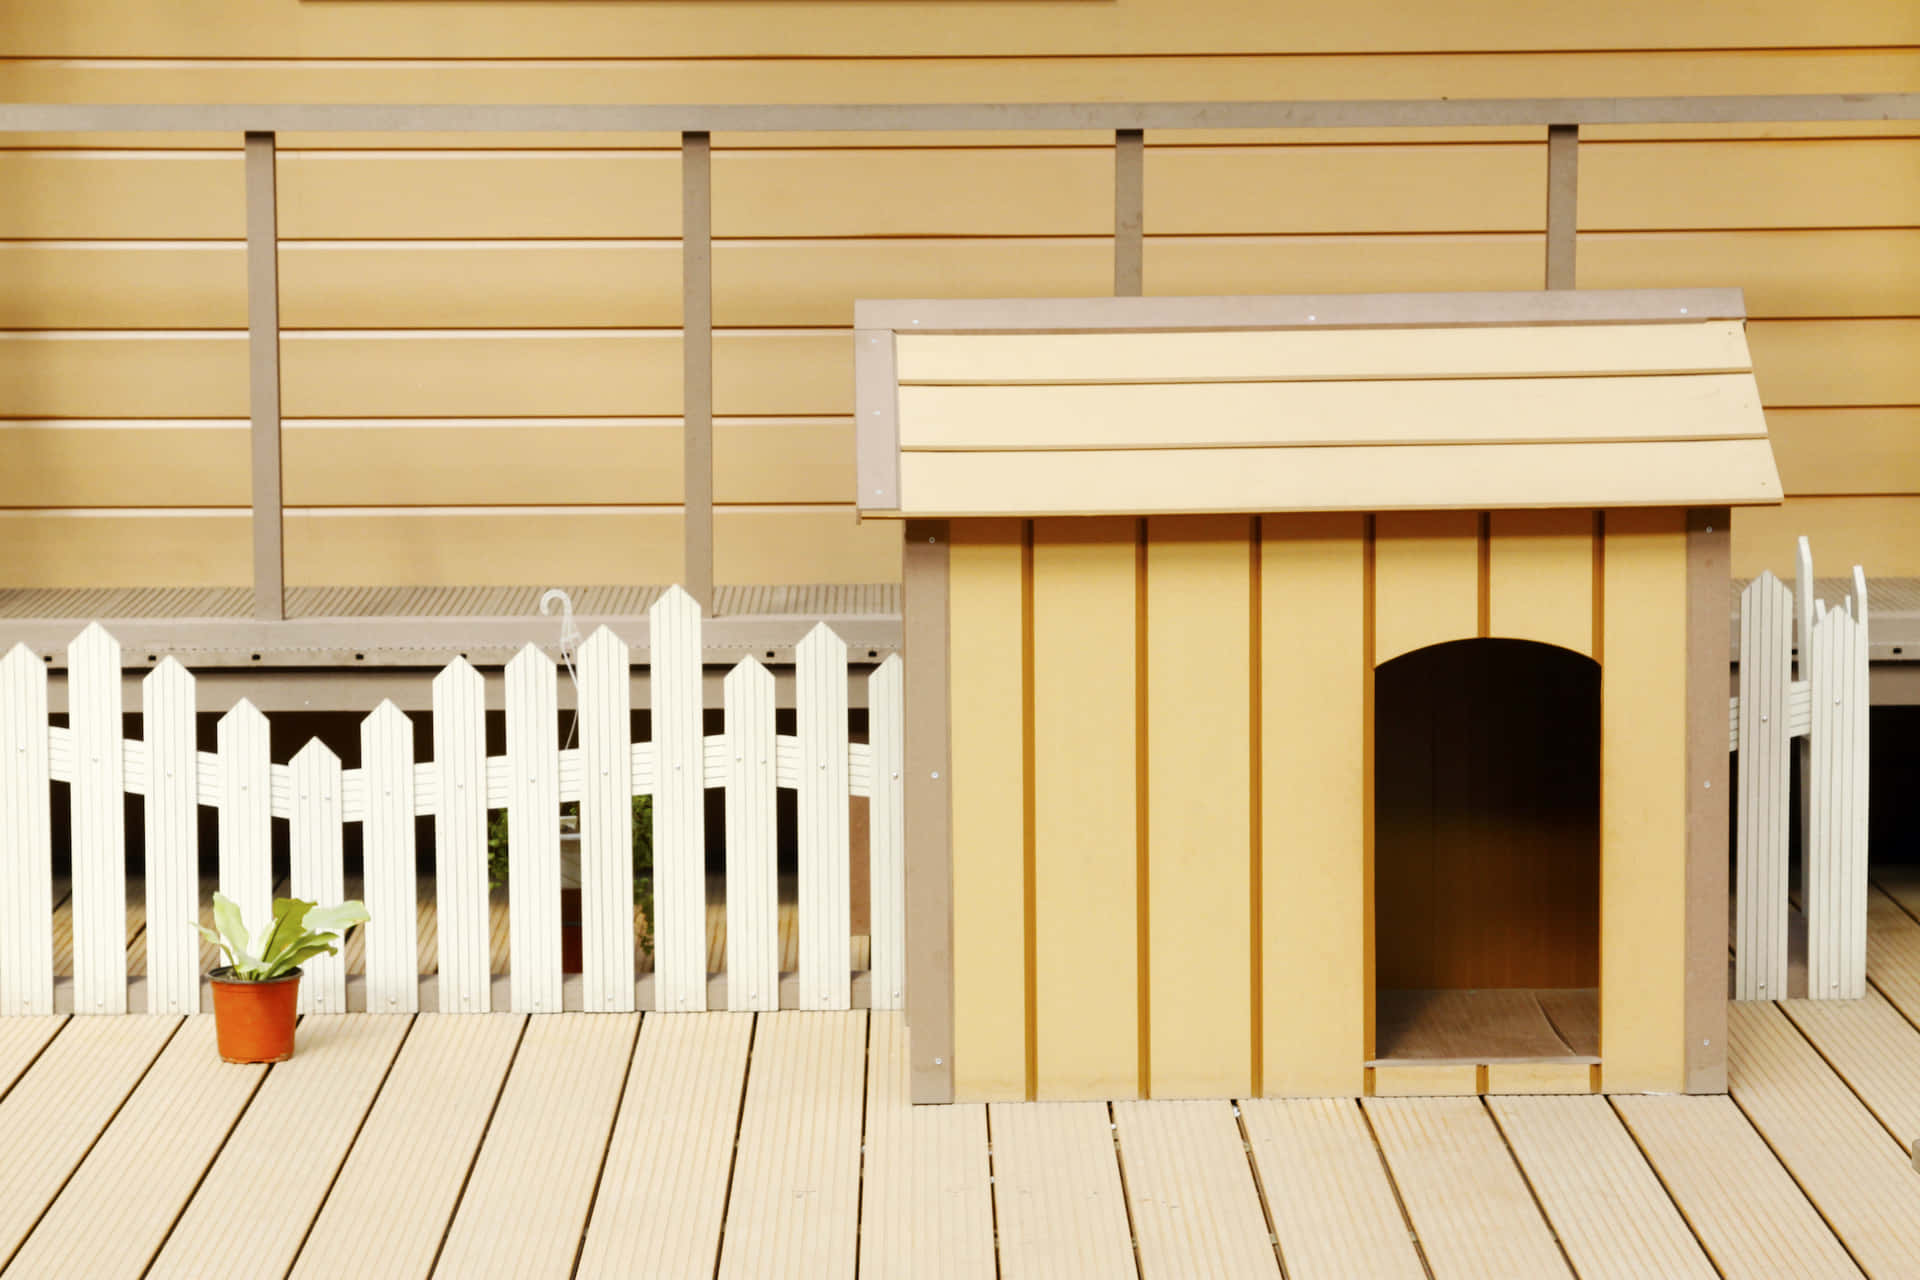 Mini Dog House Pictures